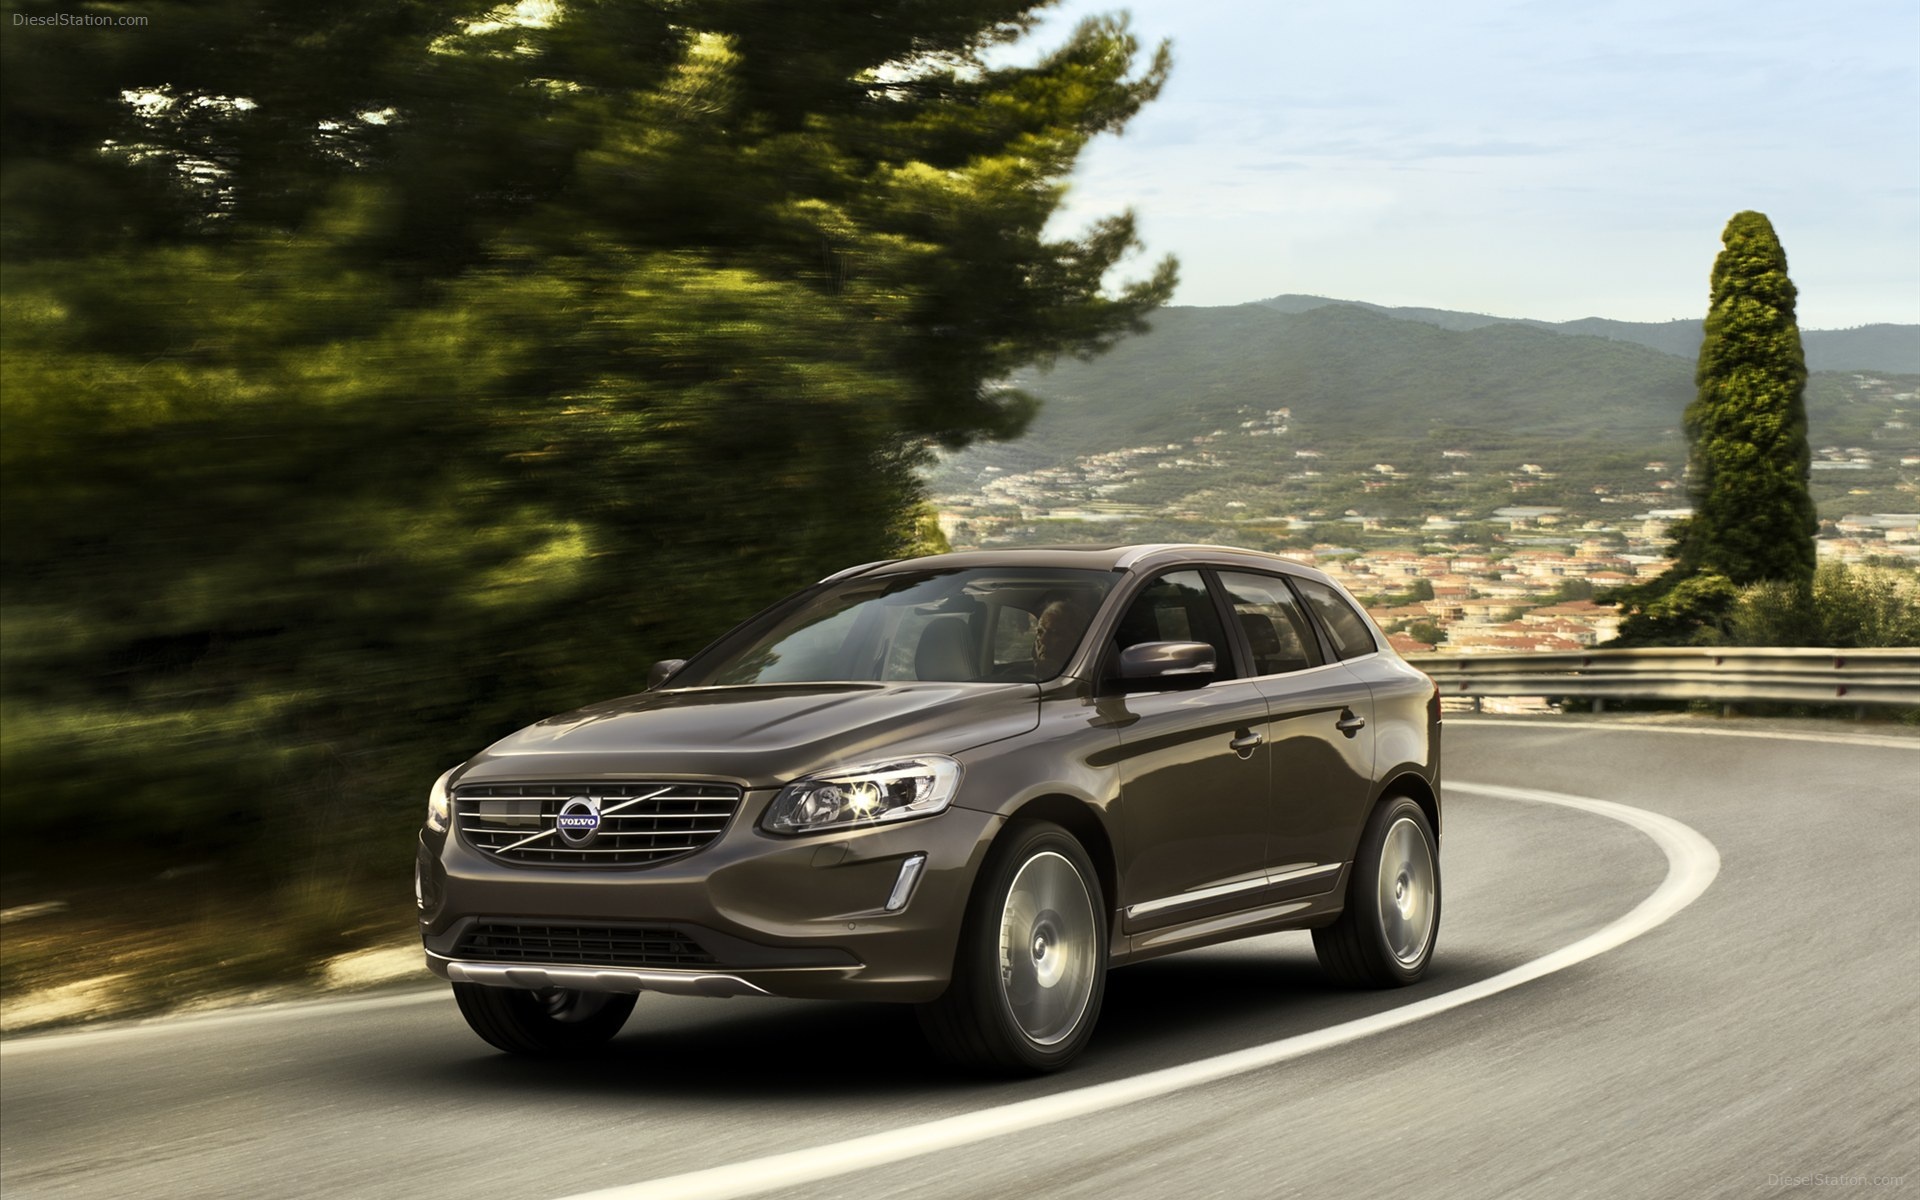 Volvo XC60, Captivating wallpaper, Elegant and powerful, Beauty in motion, 1920x1200 HD Desktop